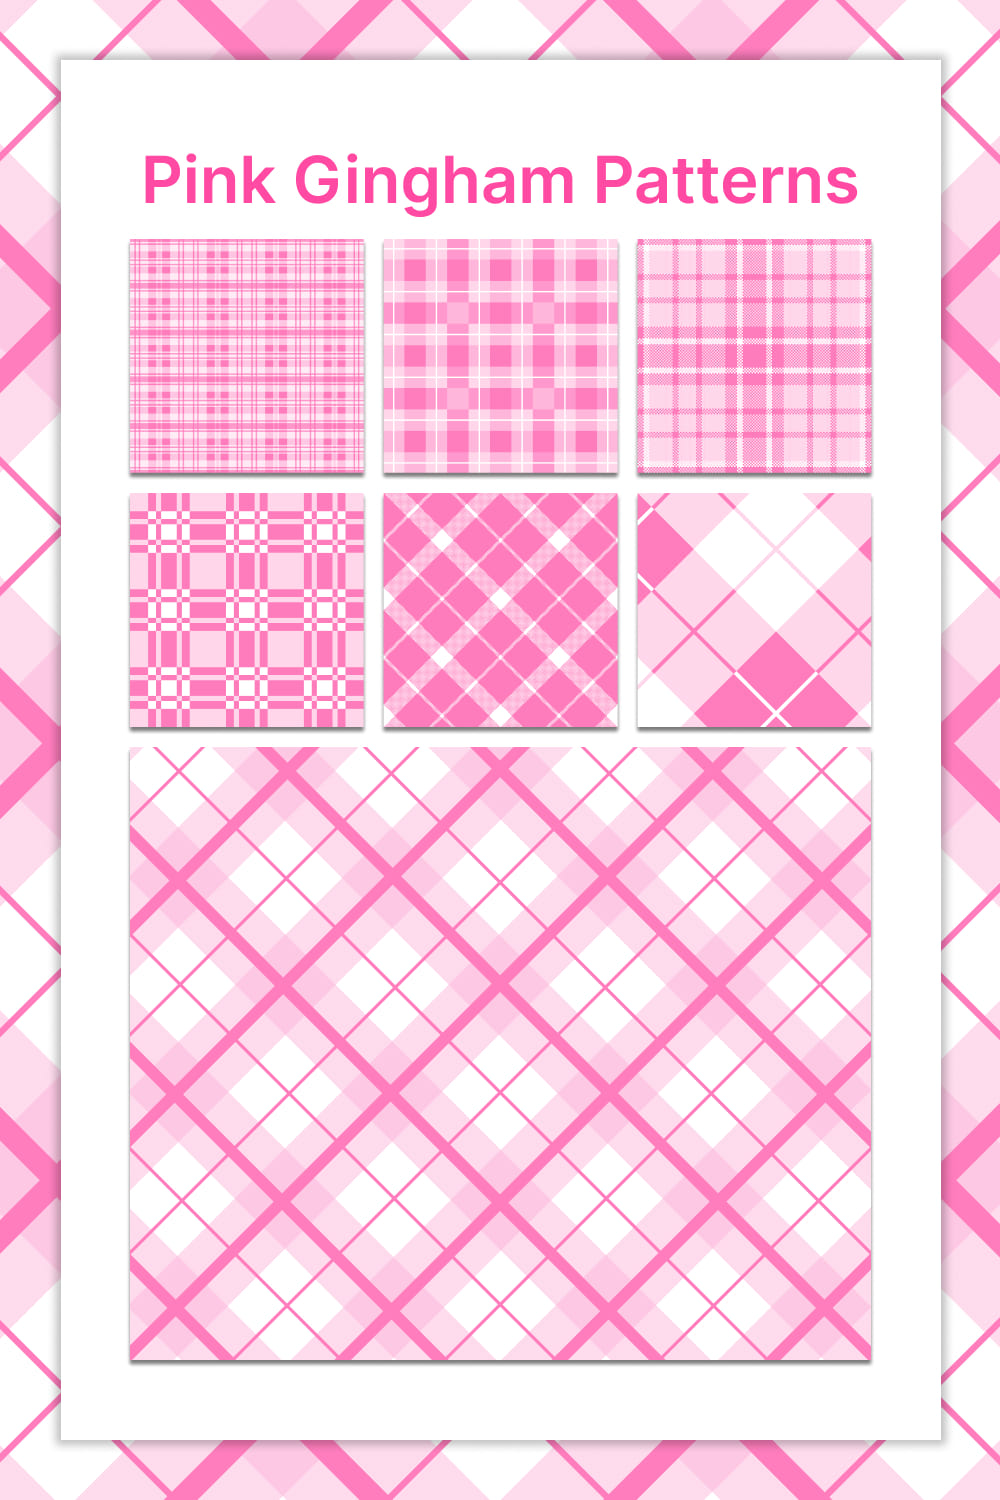 Pink gingham patterns with diverse of prints.